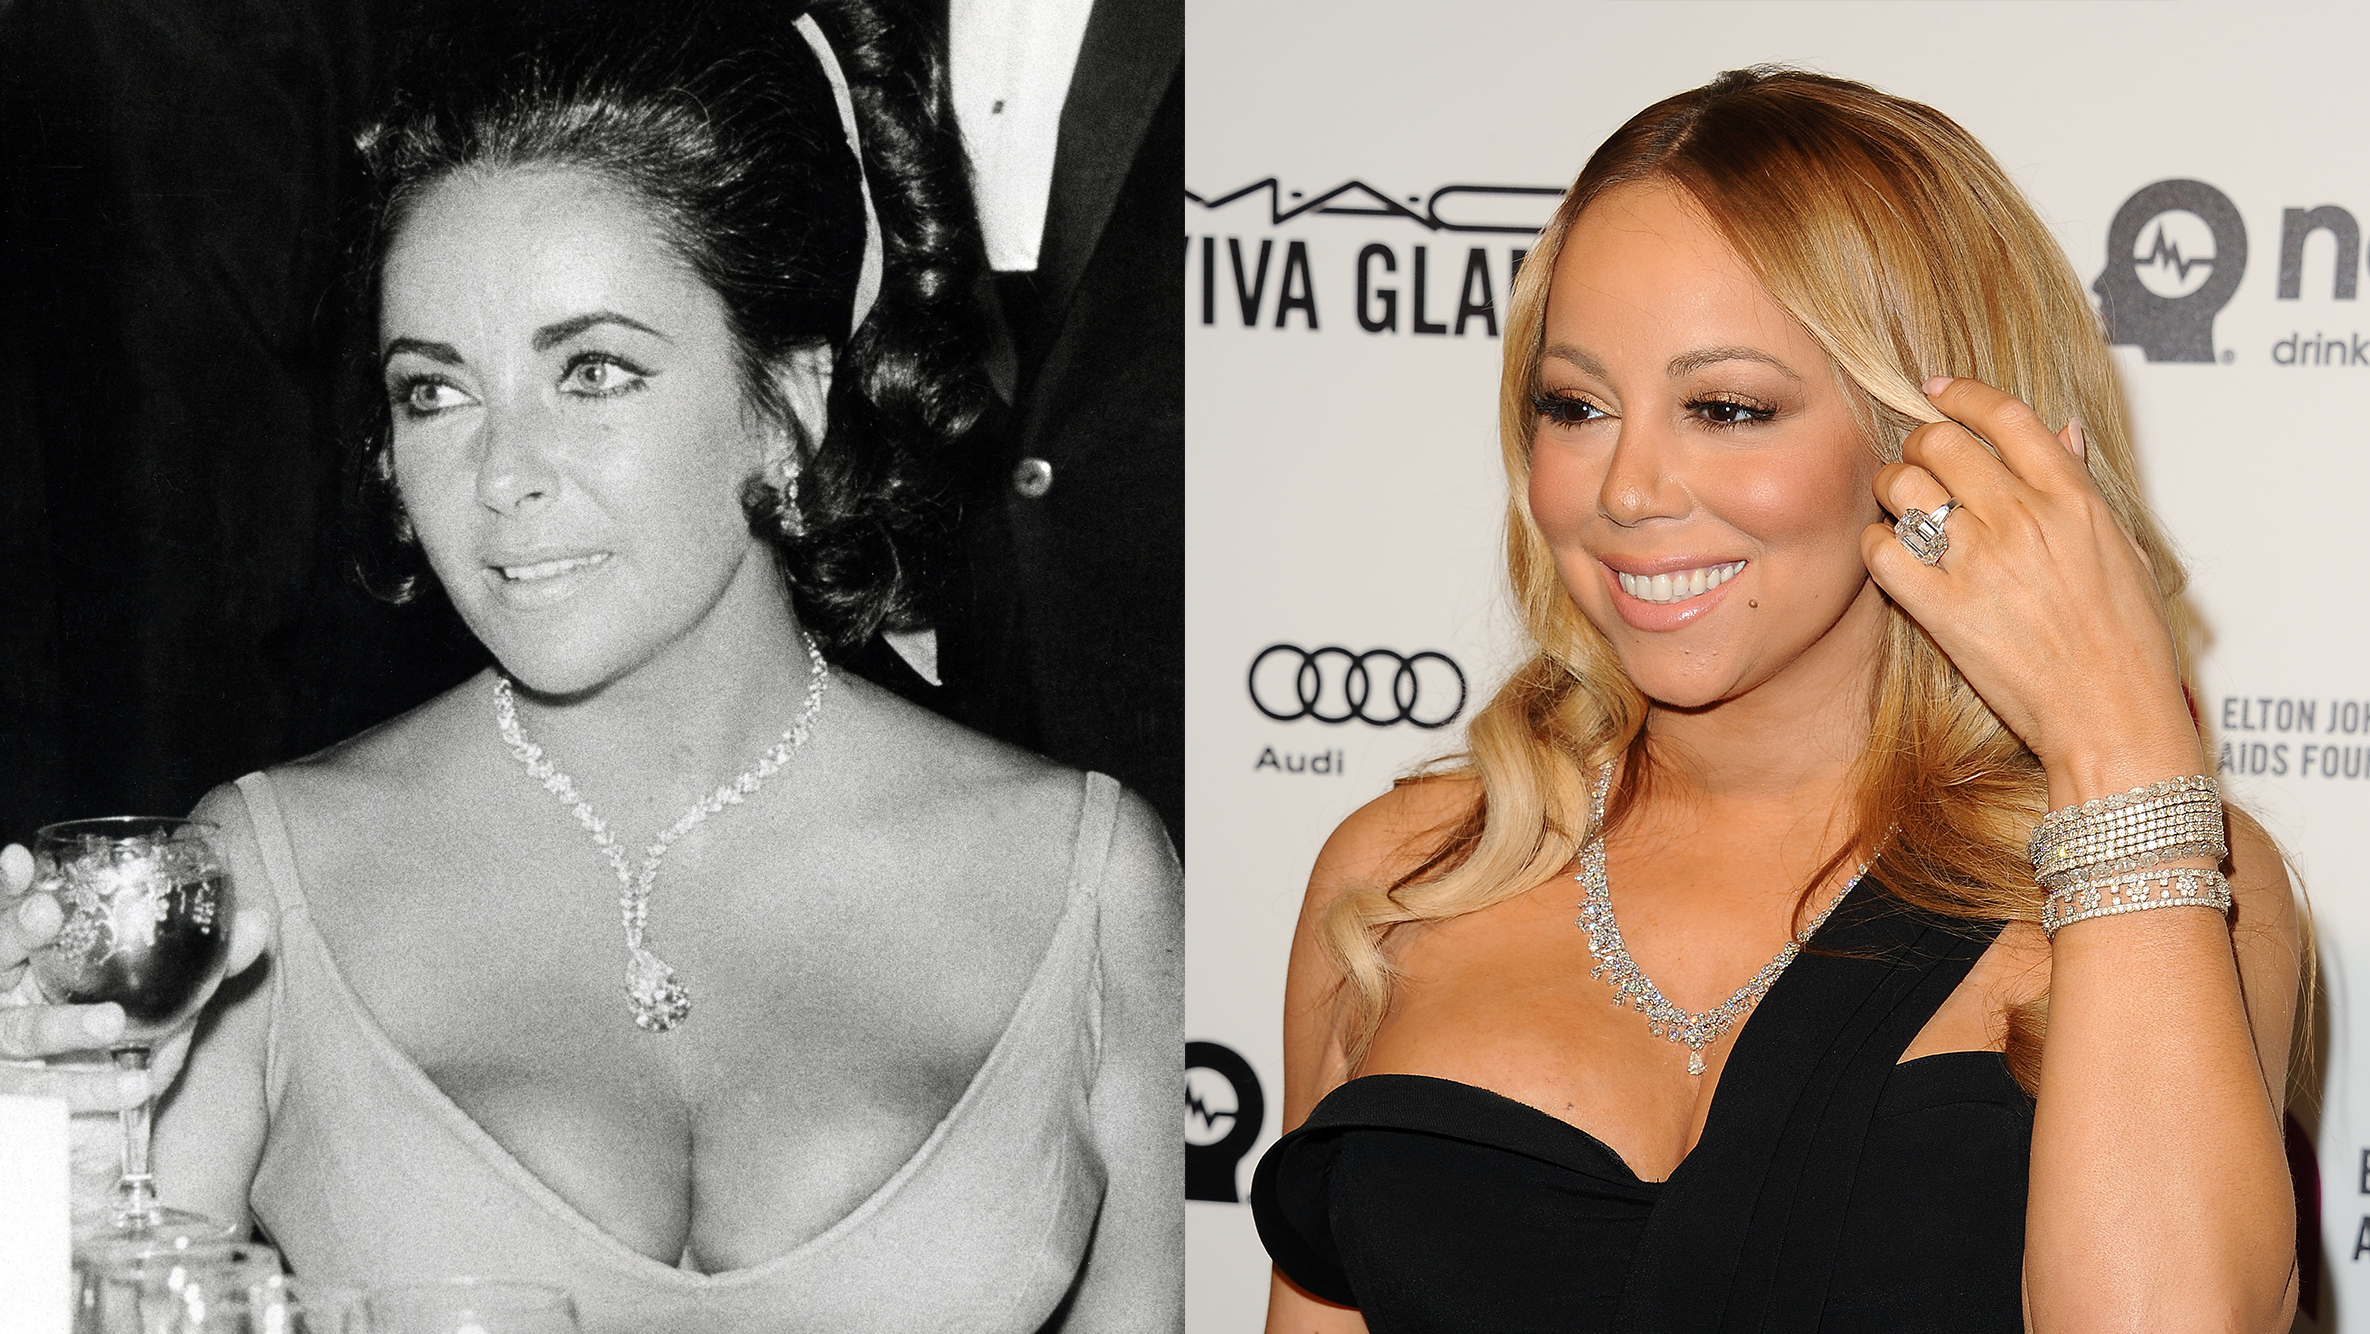 The Most Expensive, Over-the-Top Jewelry Celebrities Have Ever